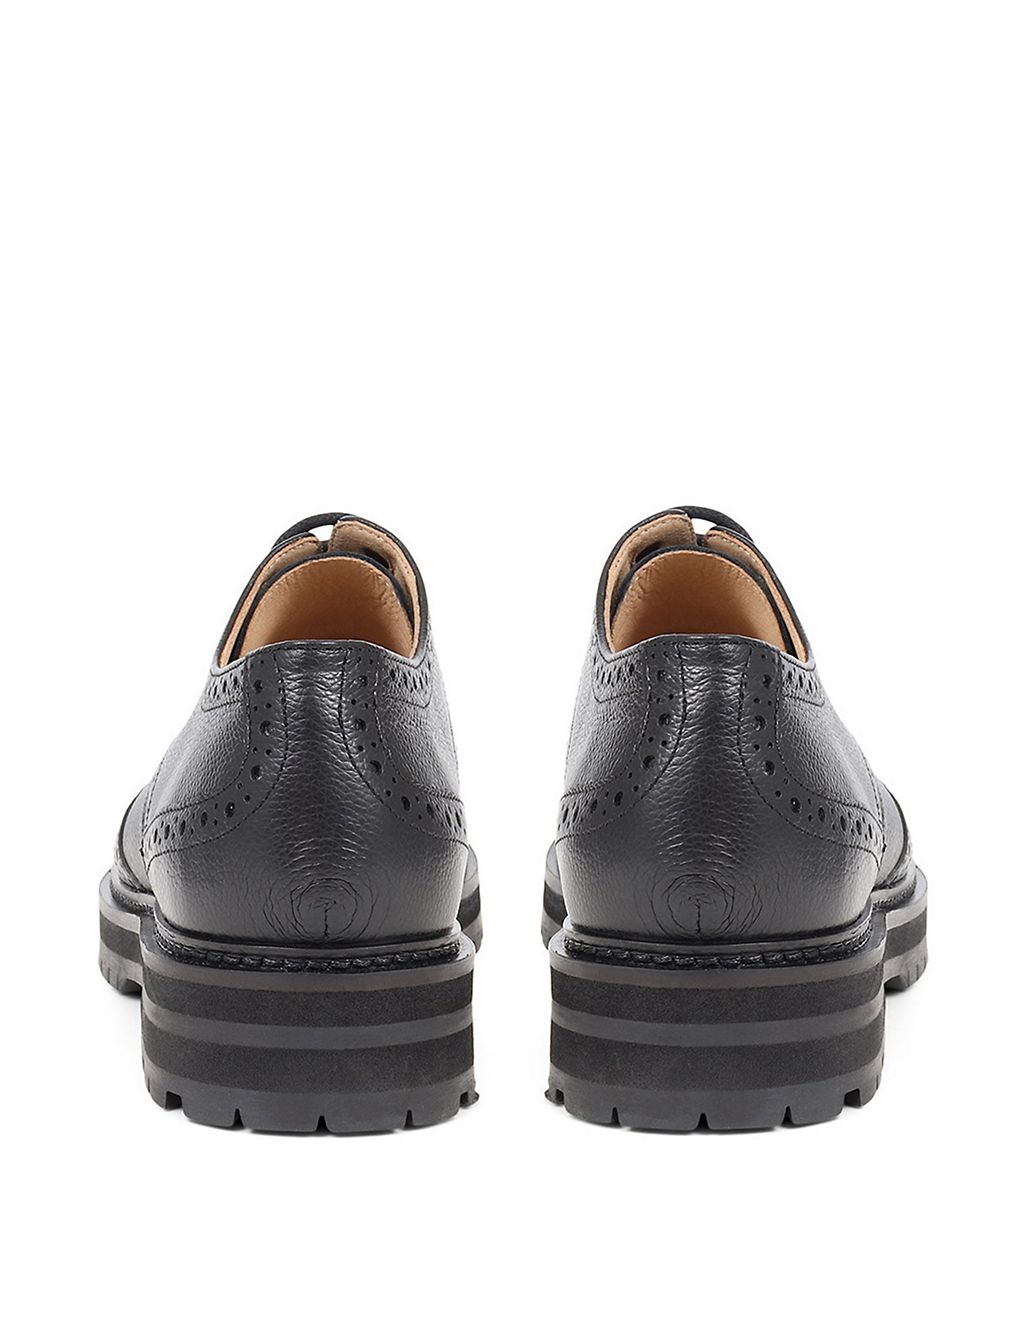 Leather Lace Up Flatform Brogues 4 of 7